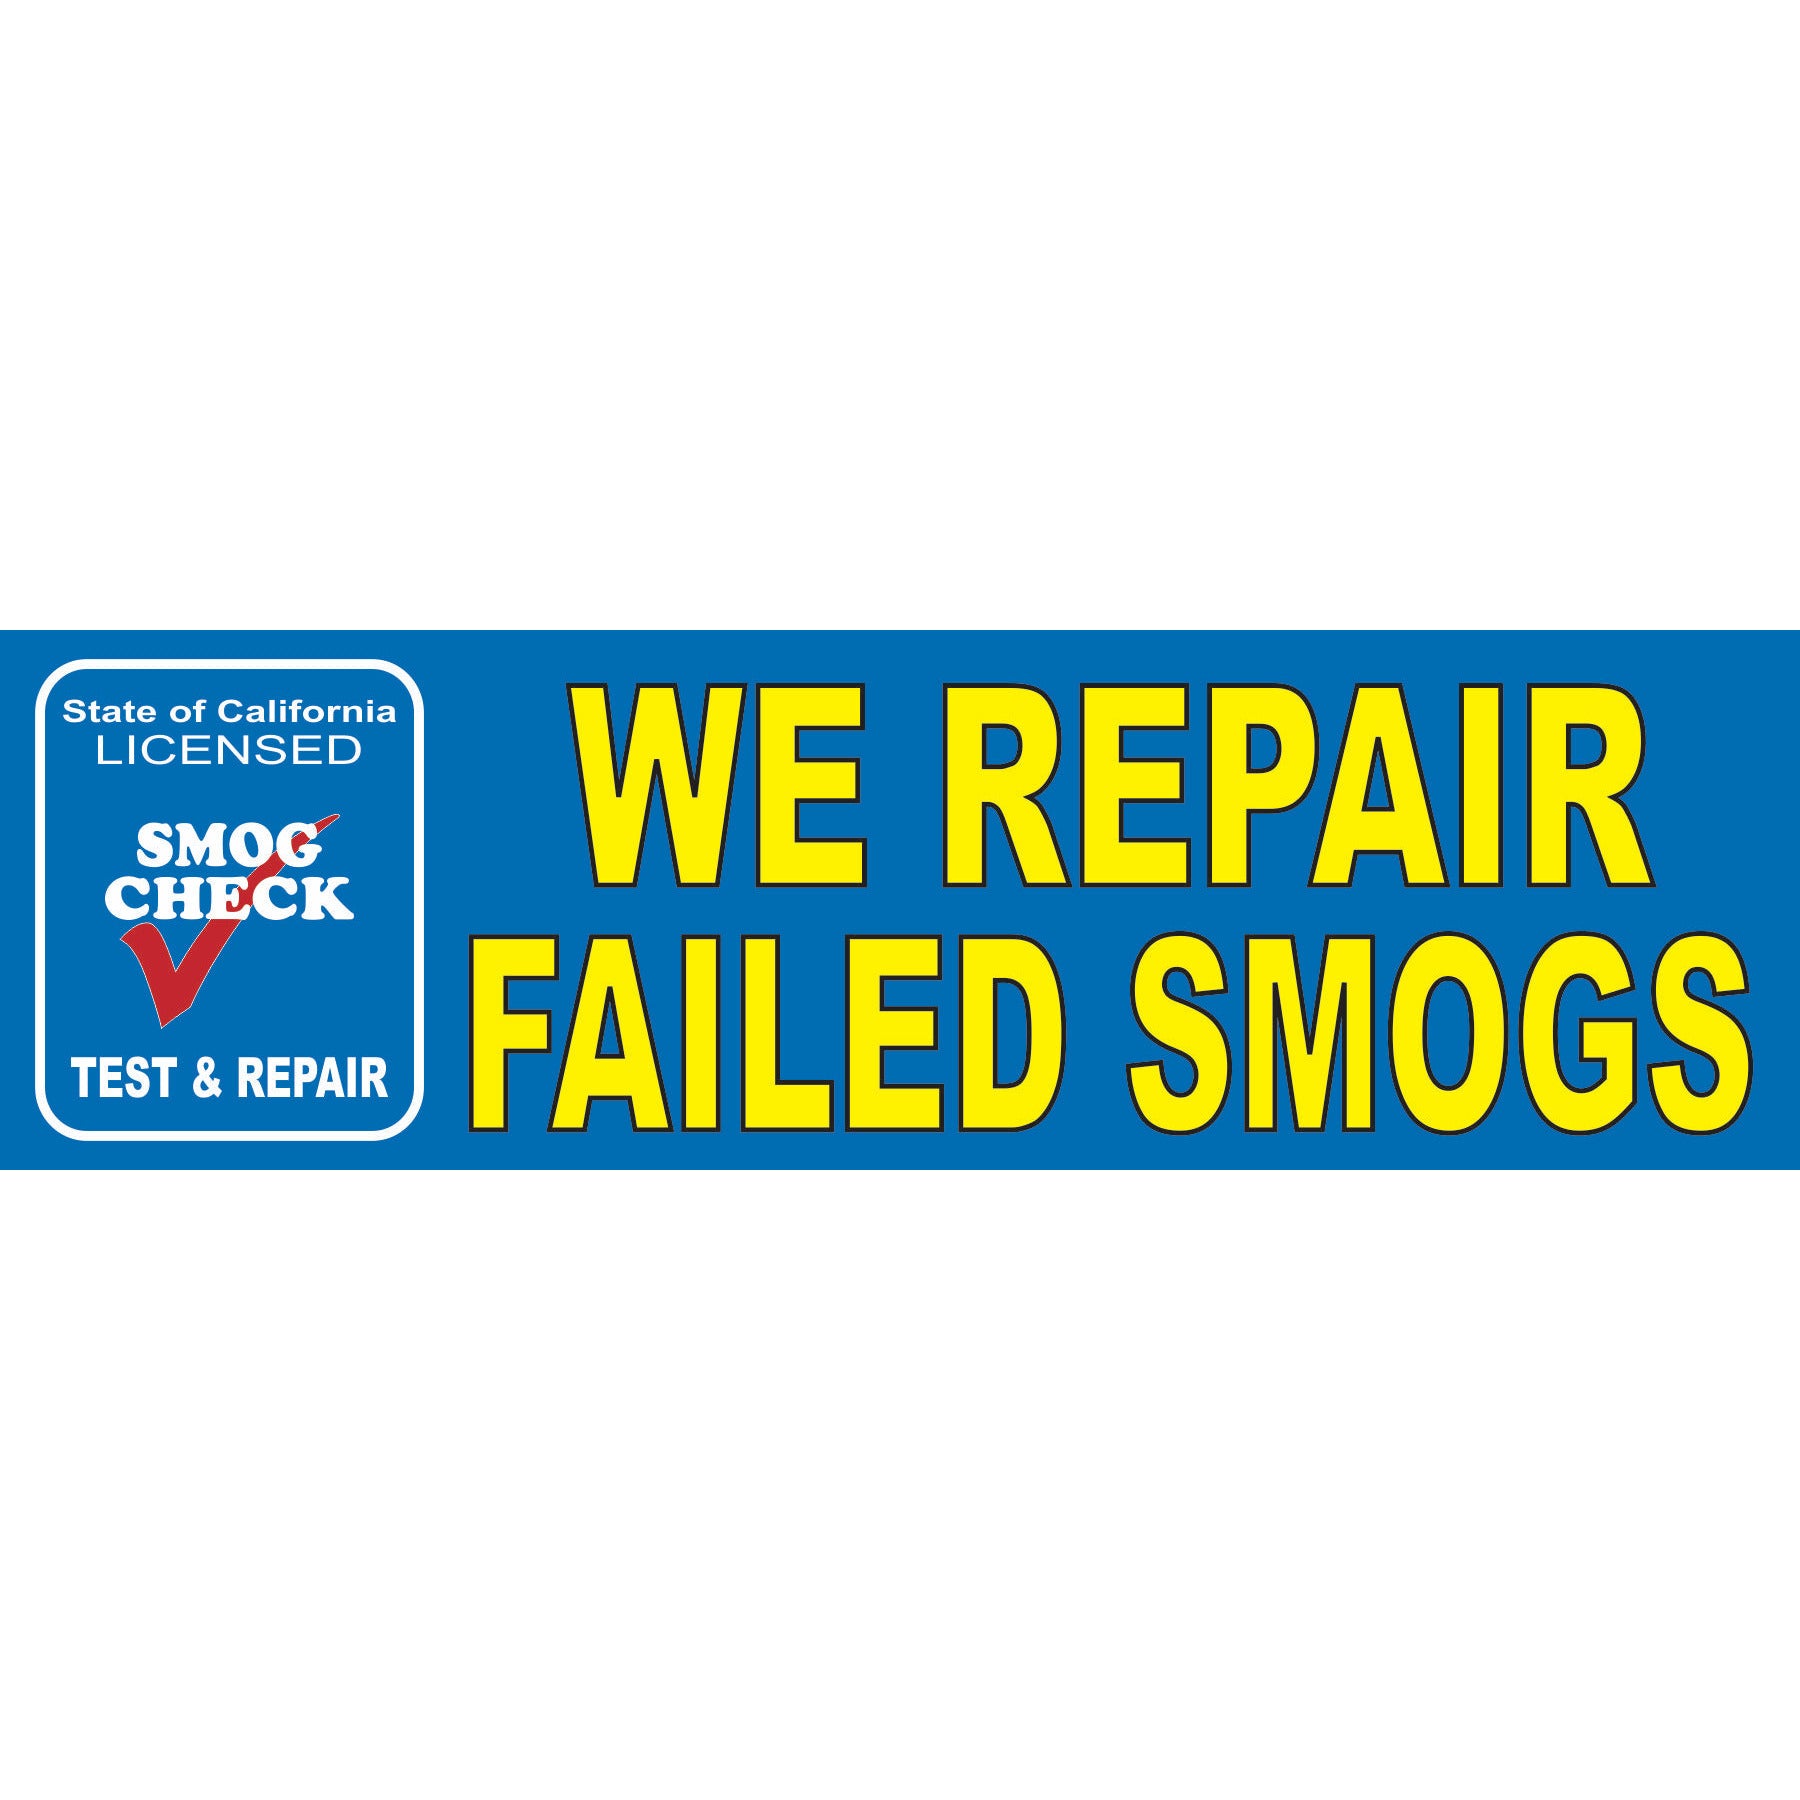 WE REPAIR FAILED SMOGS 3 x 10 BANNER with GROMMETS / SB-9412 !!!